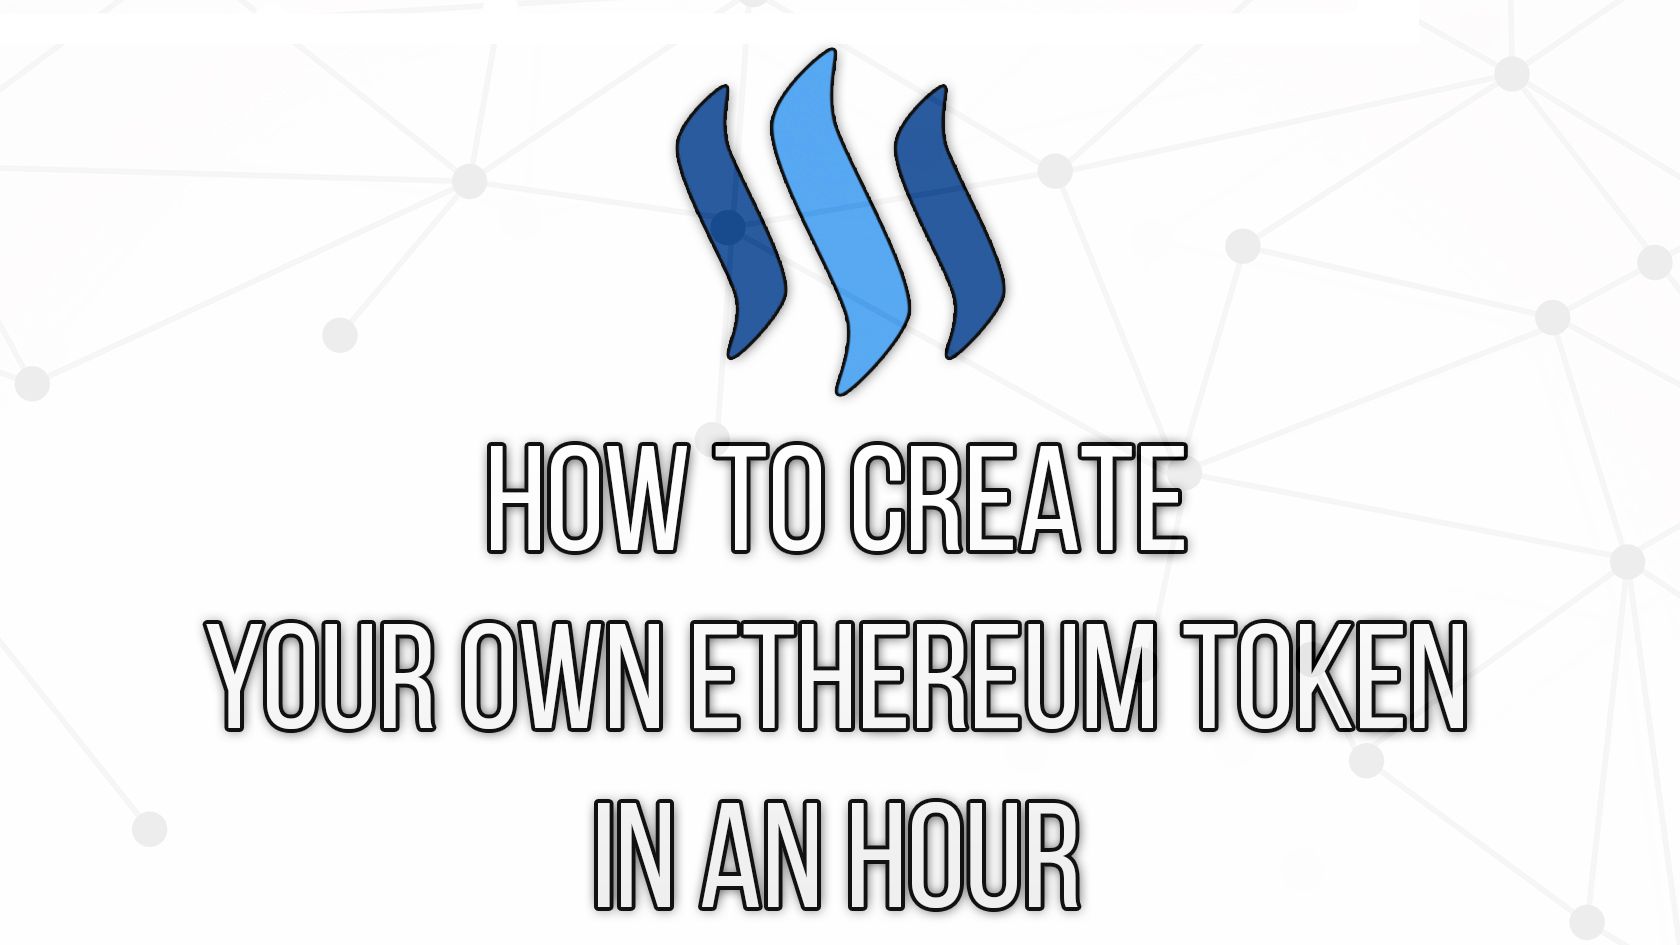 Create cryptocurrency on ethereum sharon michelle crypto